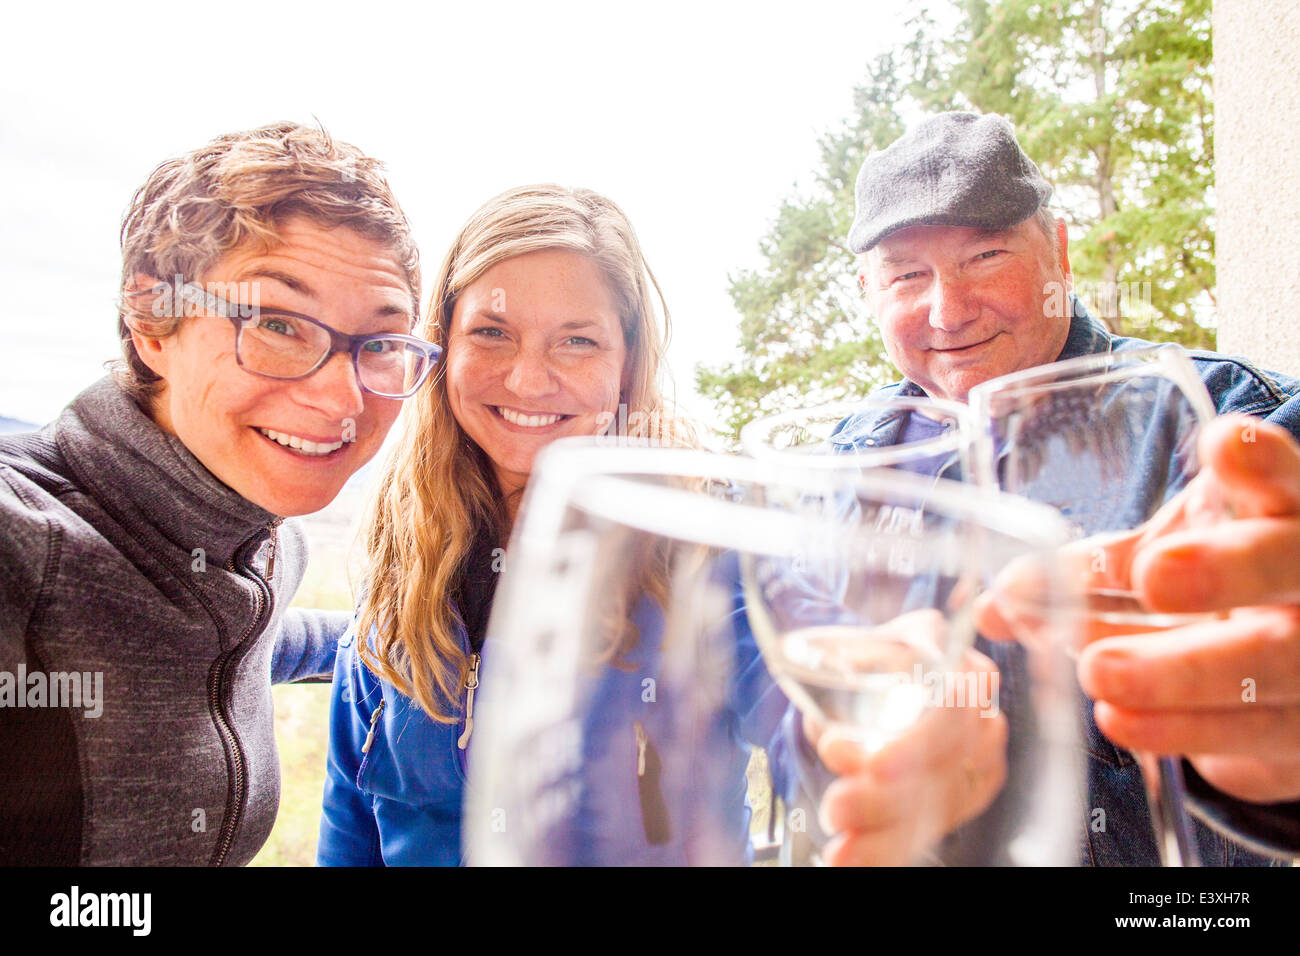 Caucasian family drinking wine together Stock Photo